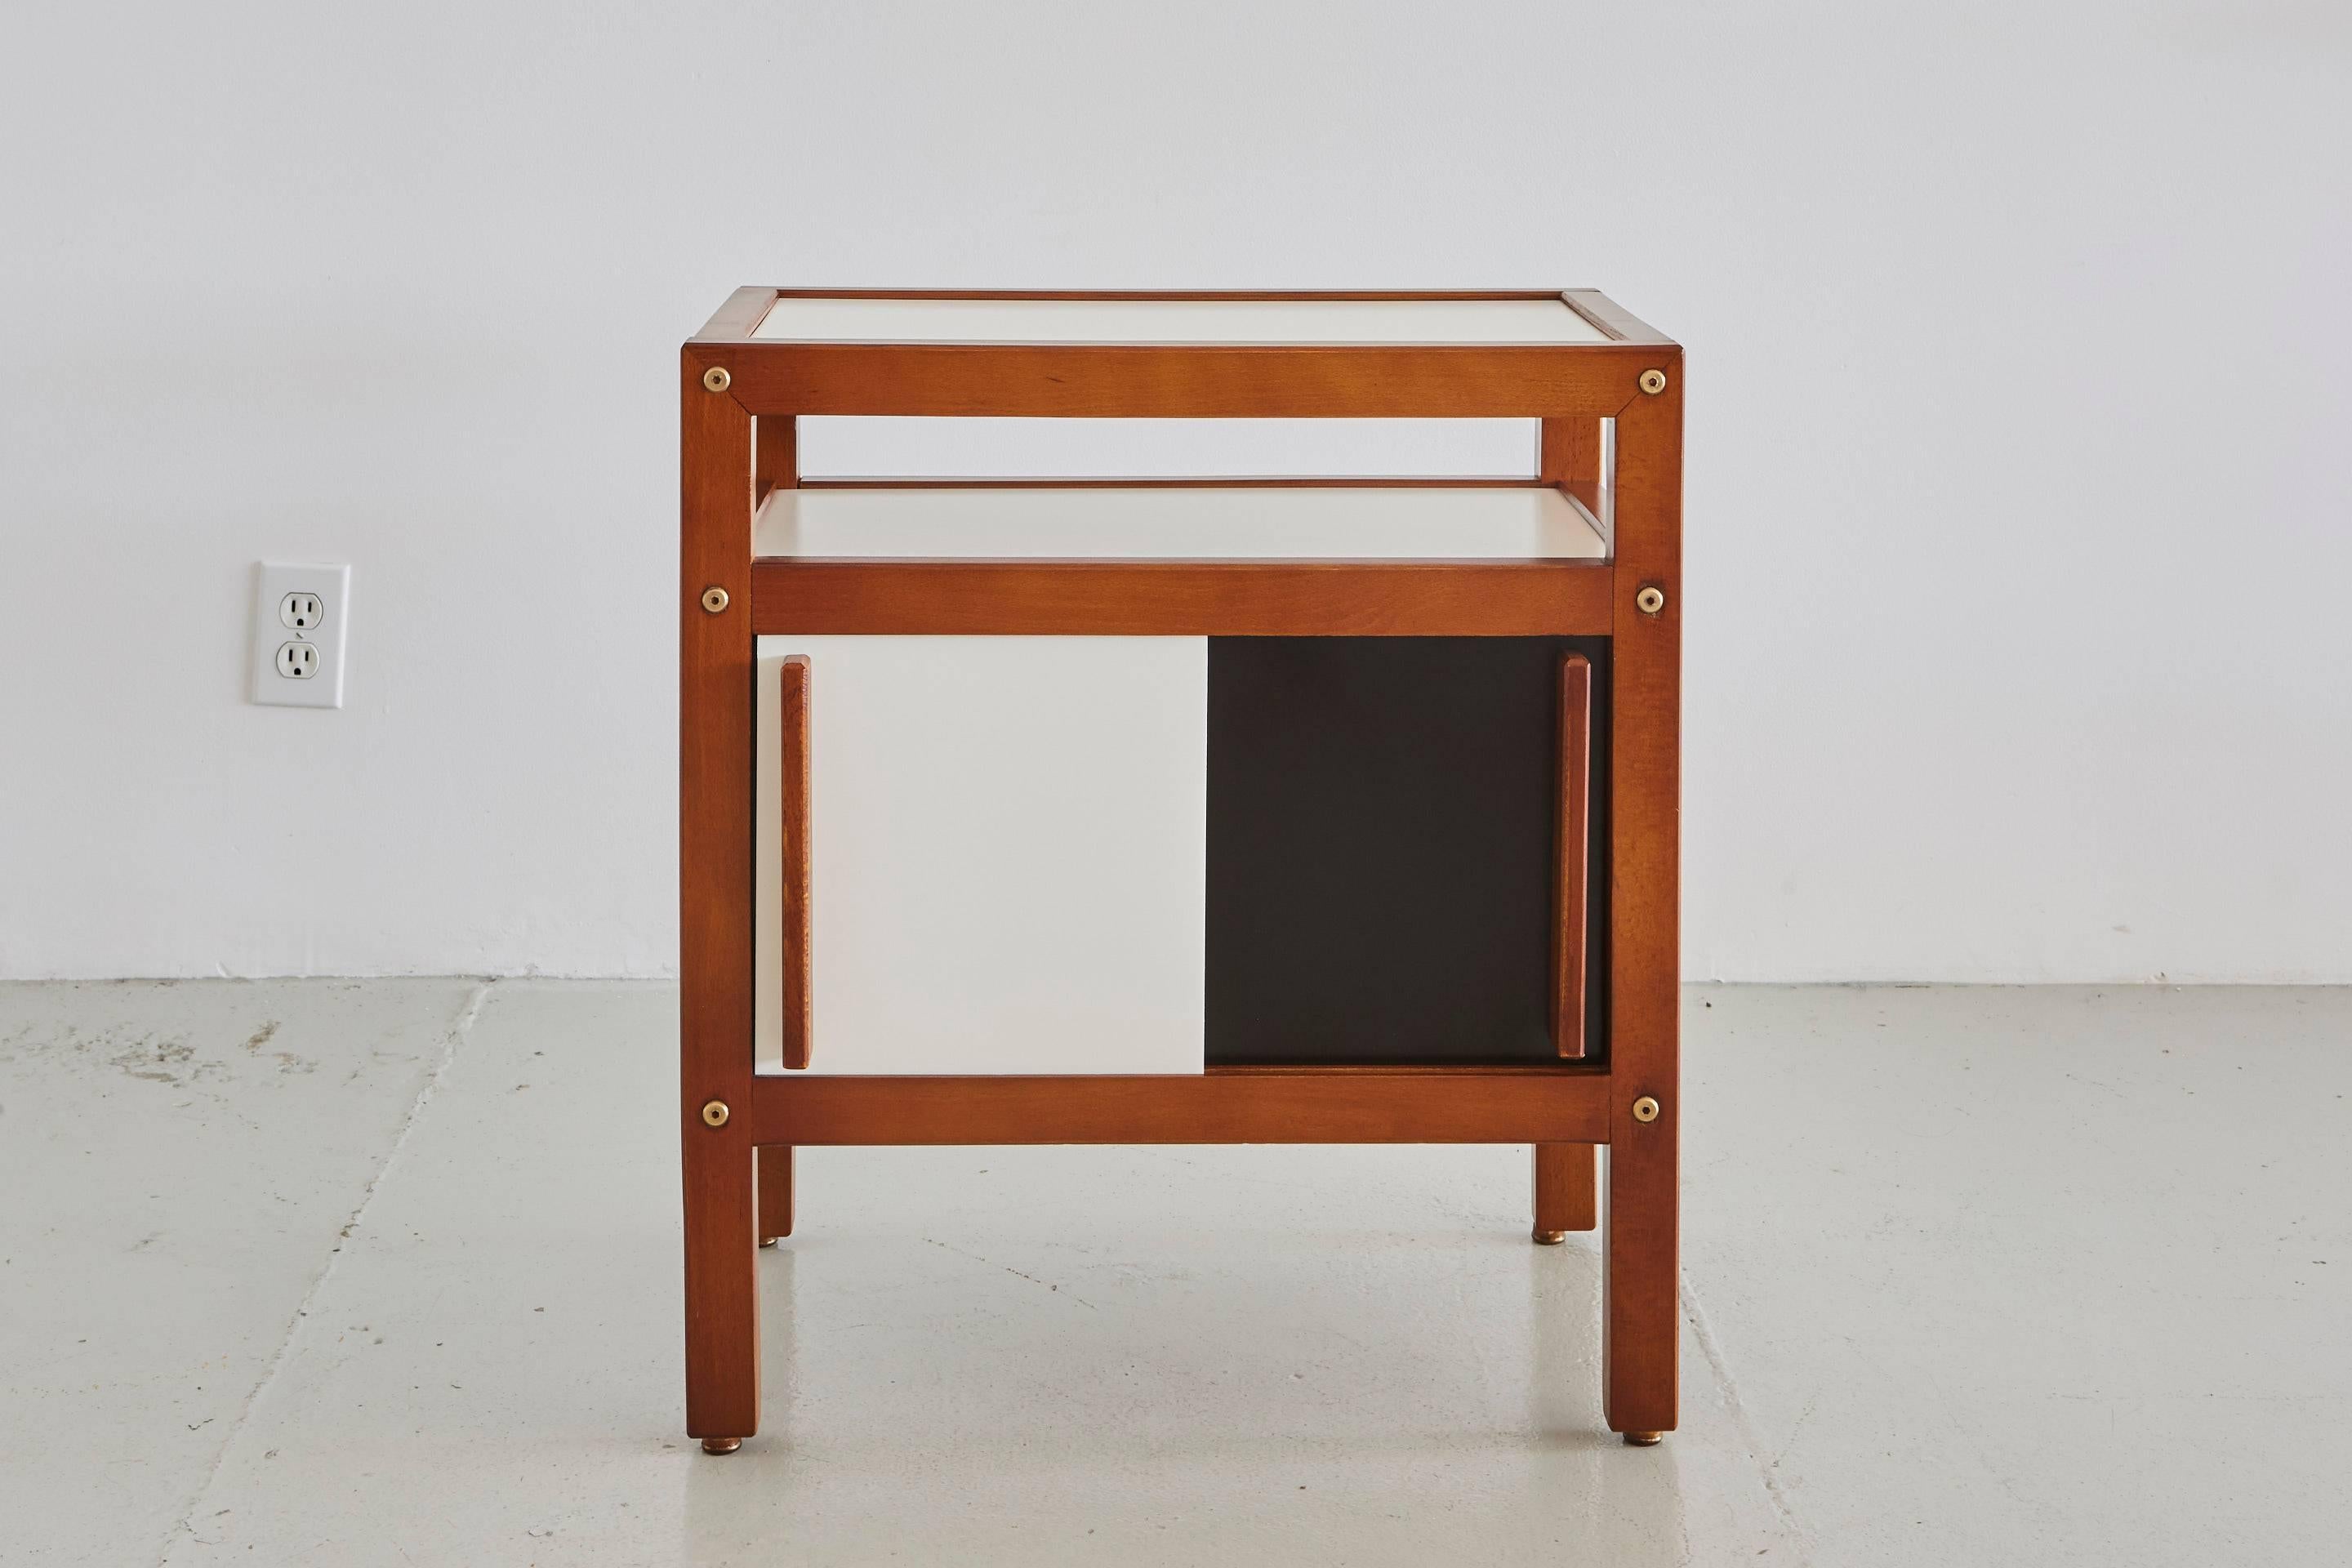 Pair of Andre Sornay end tables produced in 1950s, France. 
Constructed of teak wood, contrasting black and white sliding doors open to reveal storage and extra shelf. Great wood handle detail.